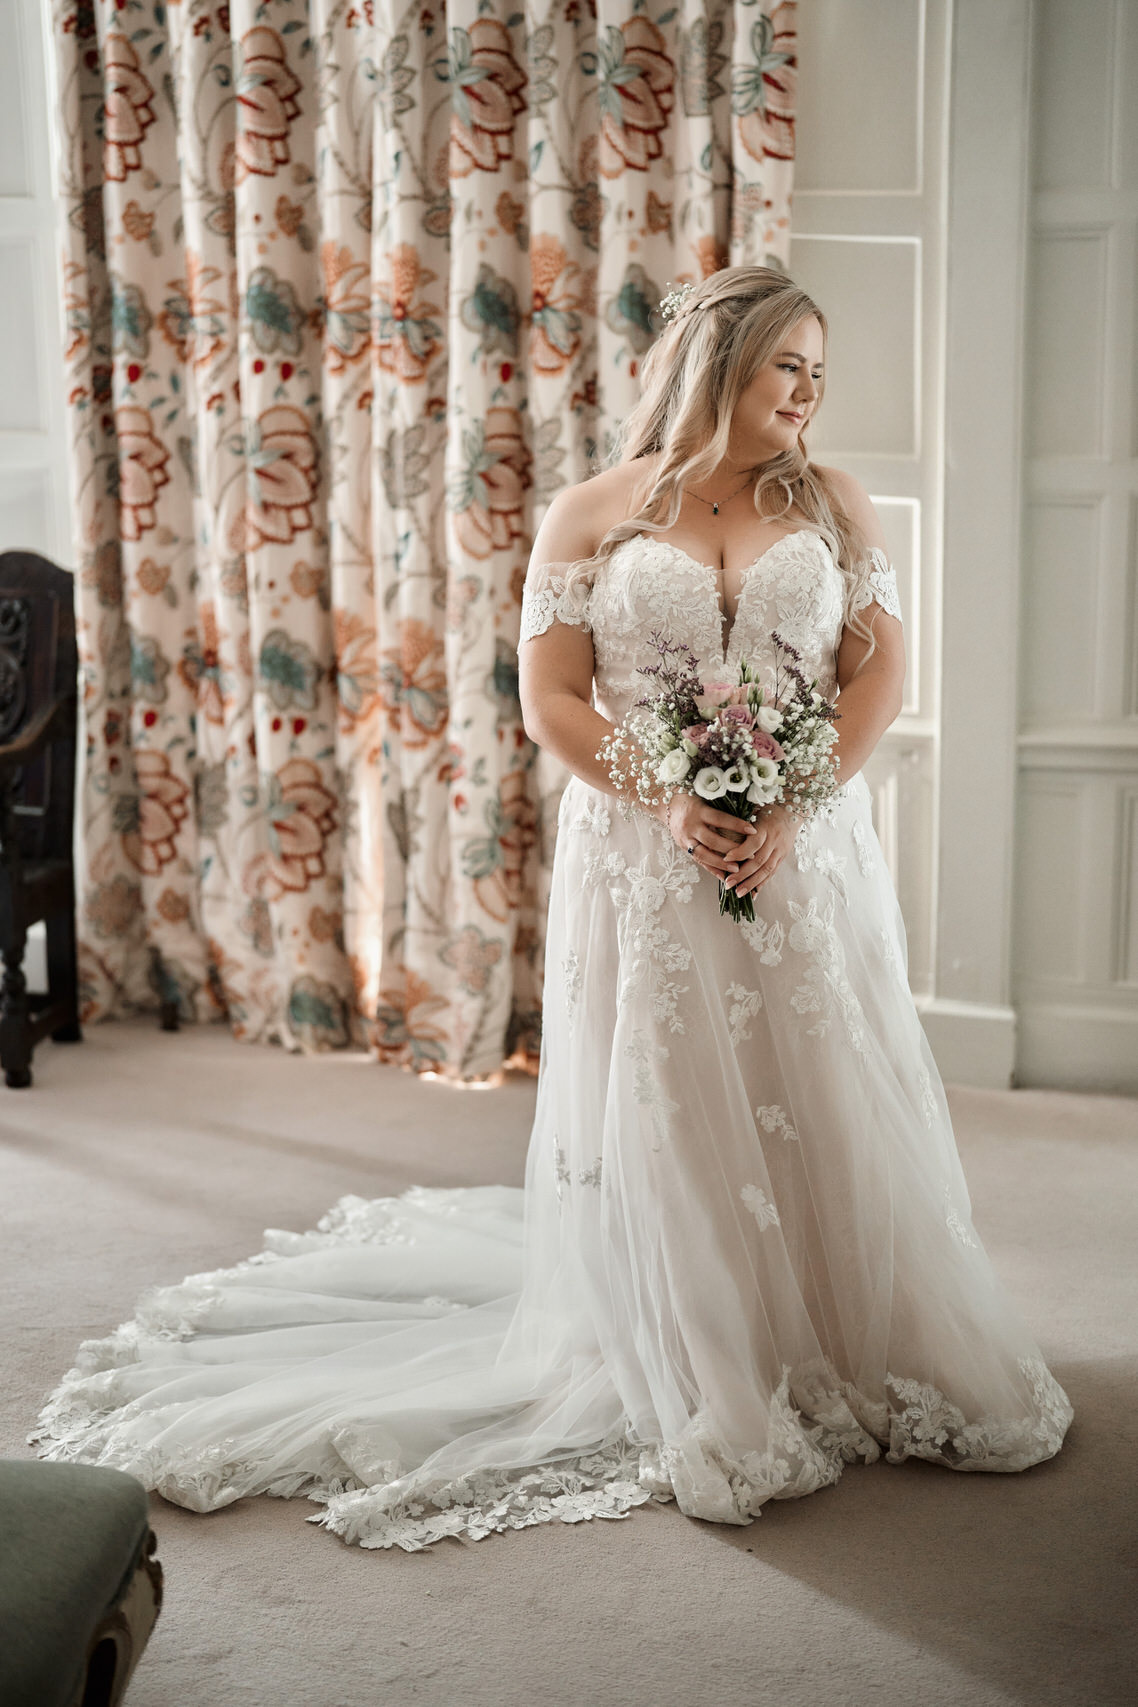 A woman in a wedding gown is standing in a room.